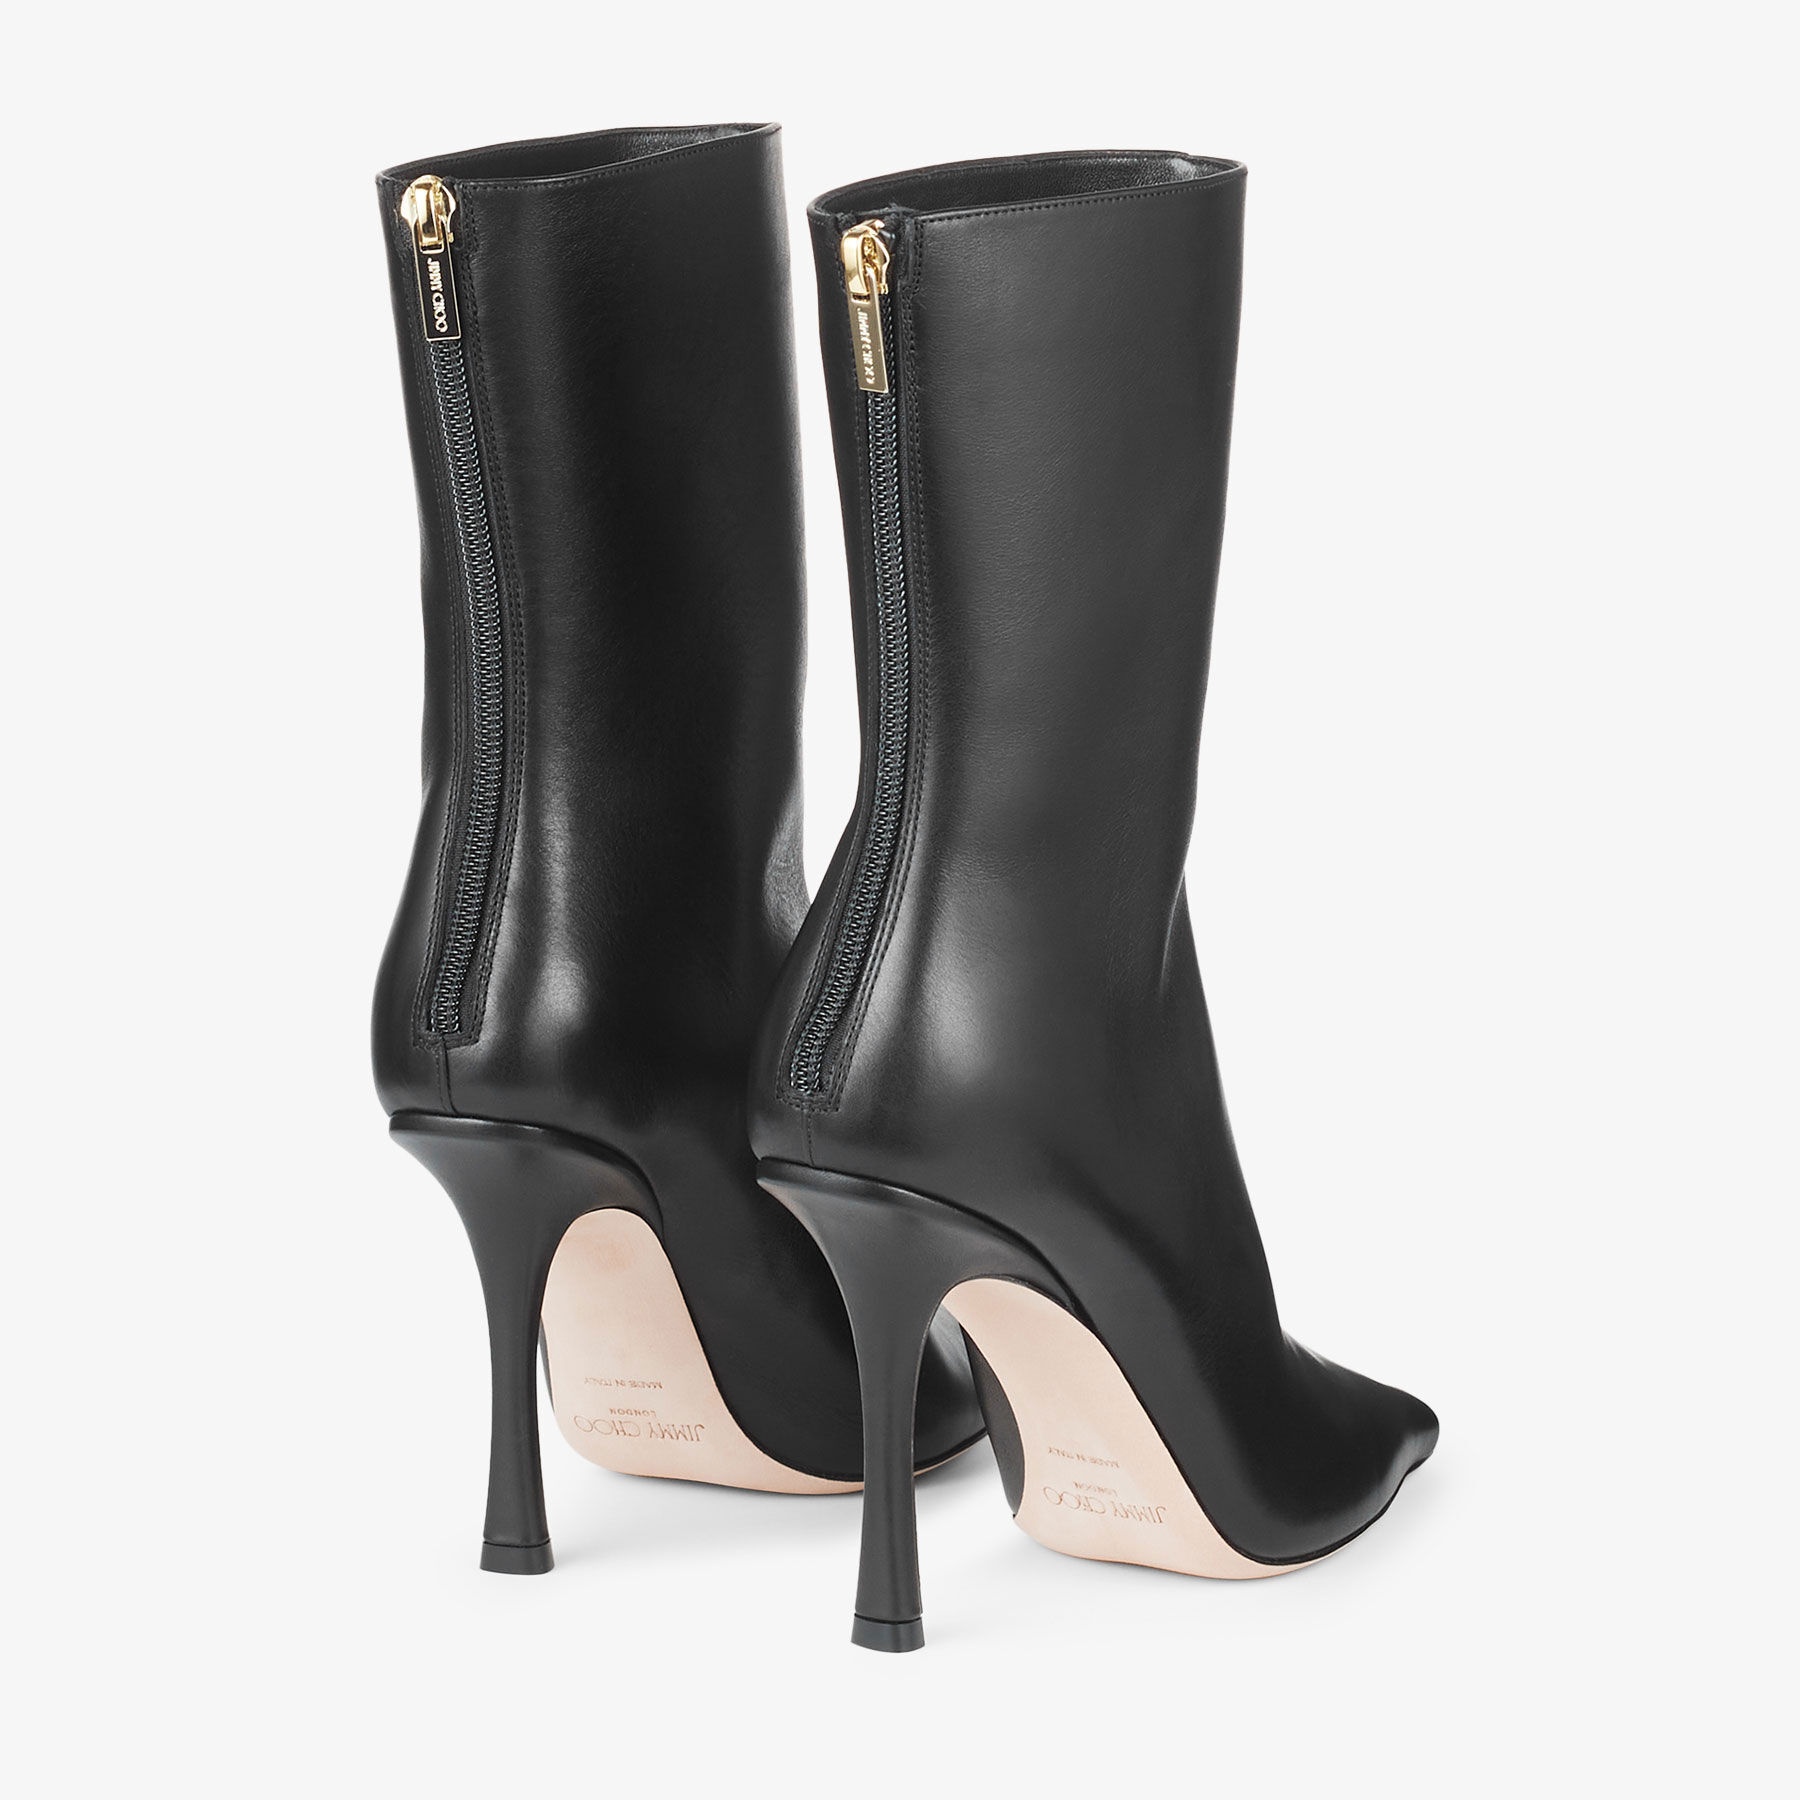 Agathe Ankle Boot 100
Black Calf Leather Ankle Boots - 7